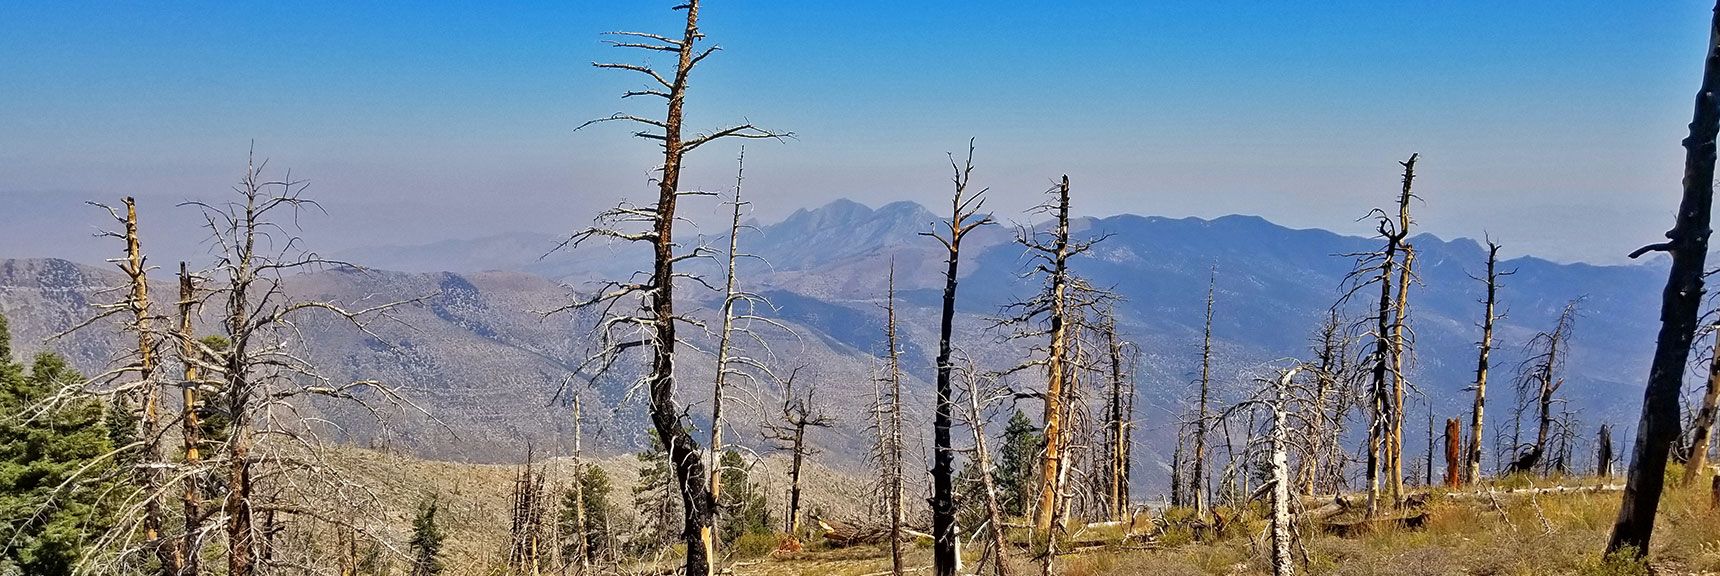 La Madre Mts in Haze of California Fires Viewed from 2013 Sexton Ridge Burn Area | Griffith Peak Southern Approach from Sexton Ridge Above Lovell Canyon, Nevada